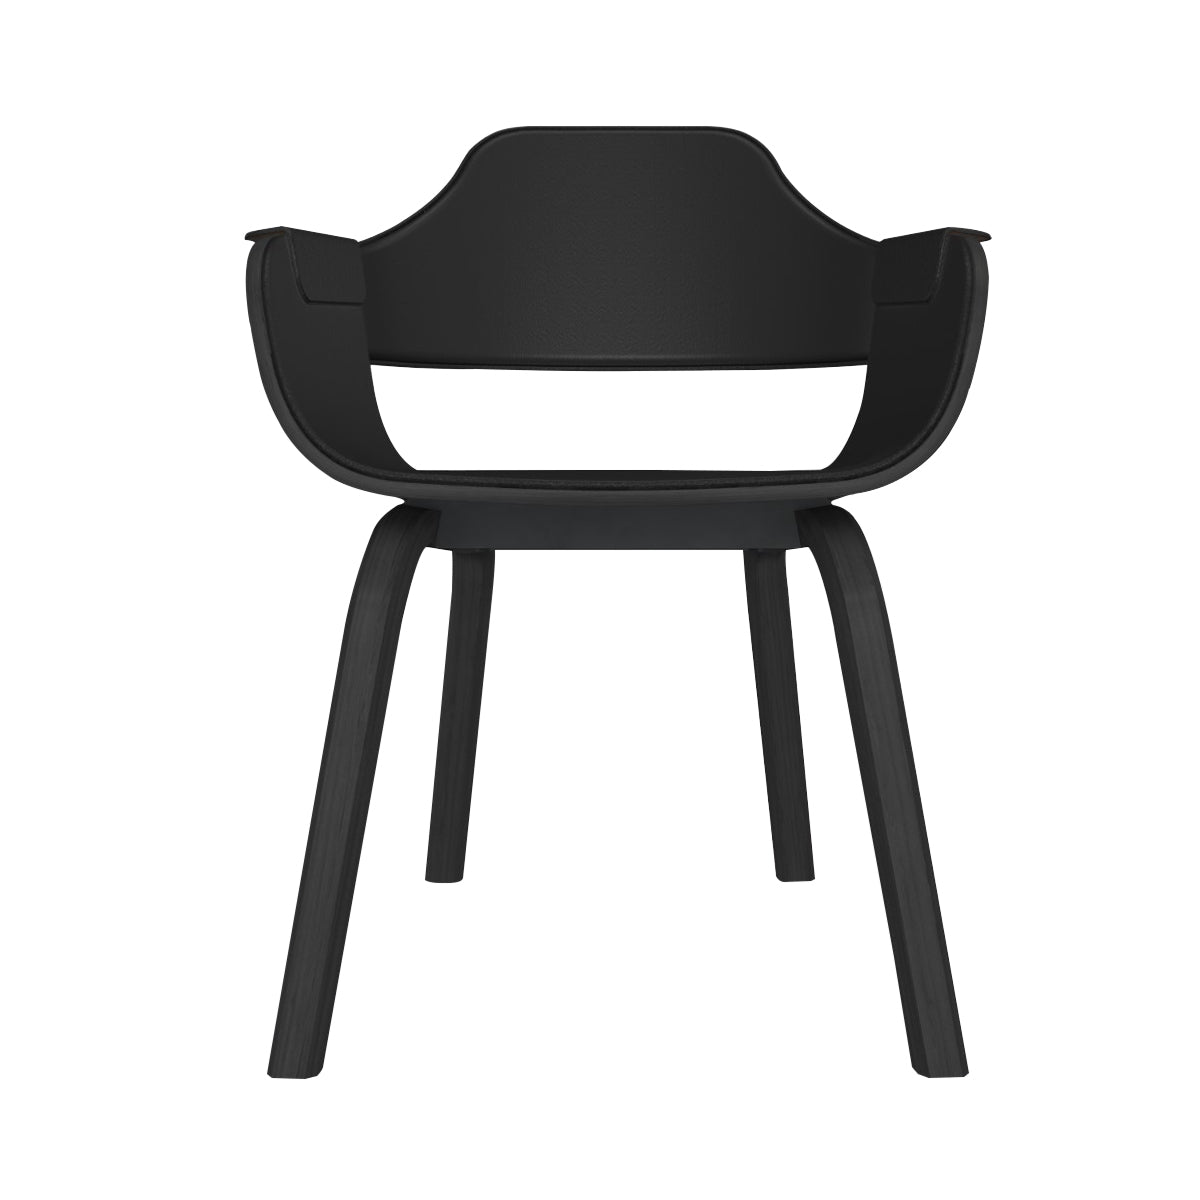 Showtime Chair: Full Upholstered + Ash Stained Black